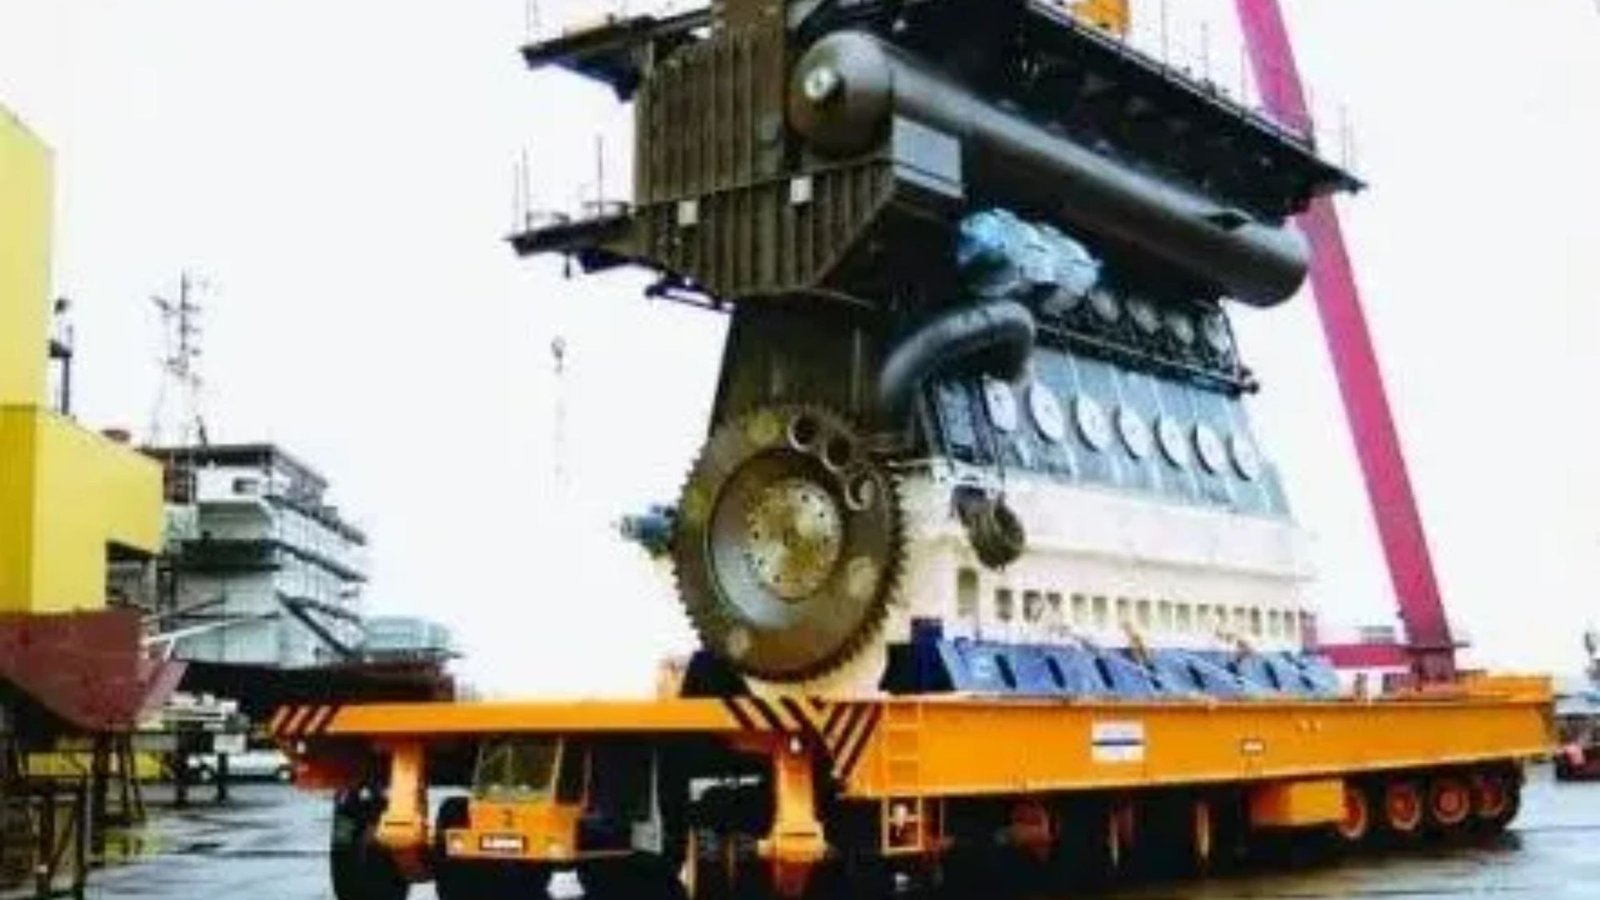 Video shows whopping scale of the worlds biggest ENGINE the size of a block of flats and as powerful as 90 Bugattis